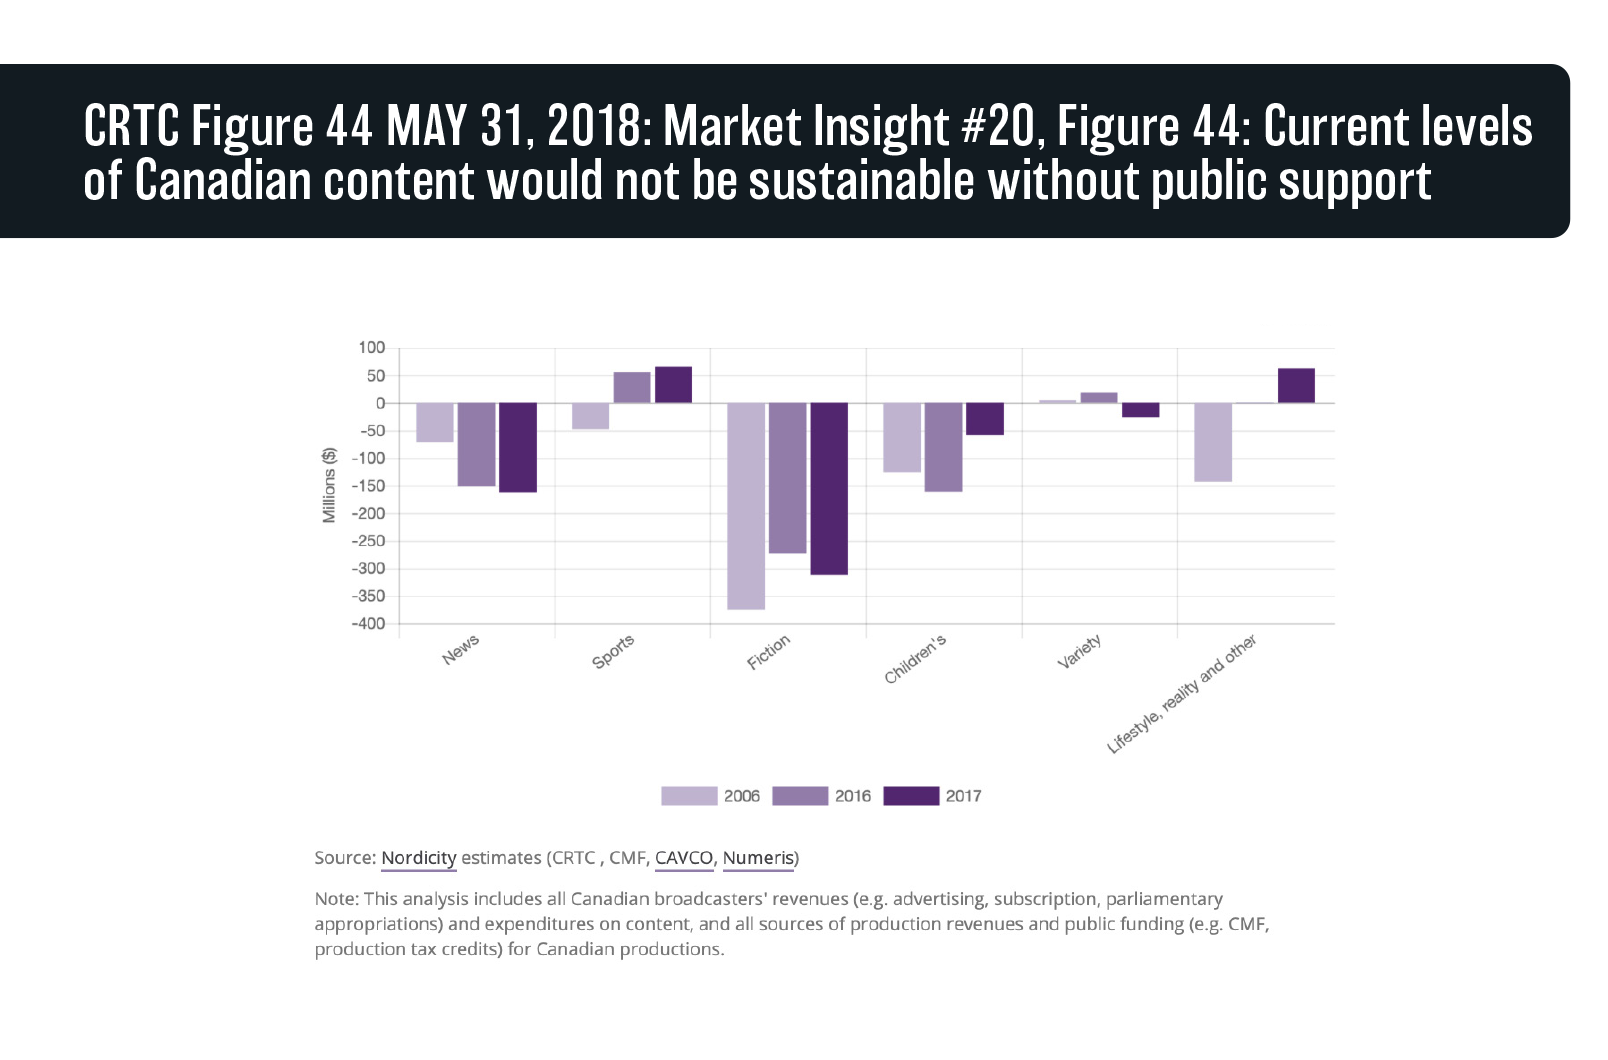 Figure 6.2: CRTC Figure 44 MAY 31, 2018: Market Insight #20, Figure 44: Current levels of Canadian content would not be sustainable without public support